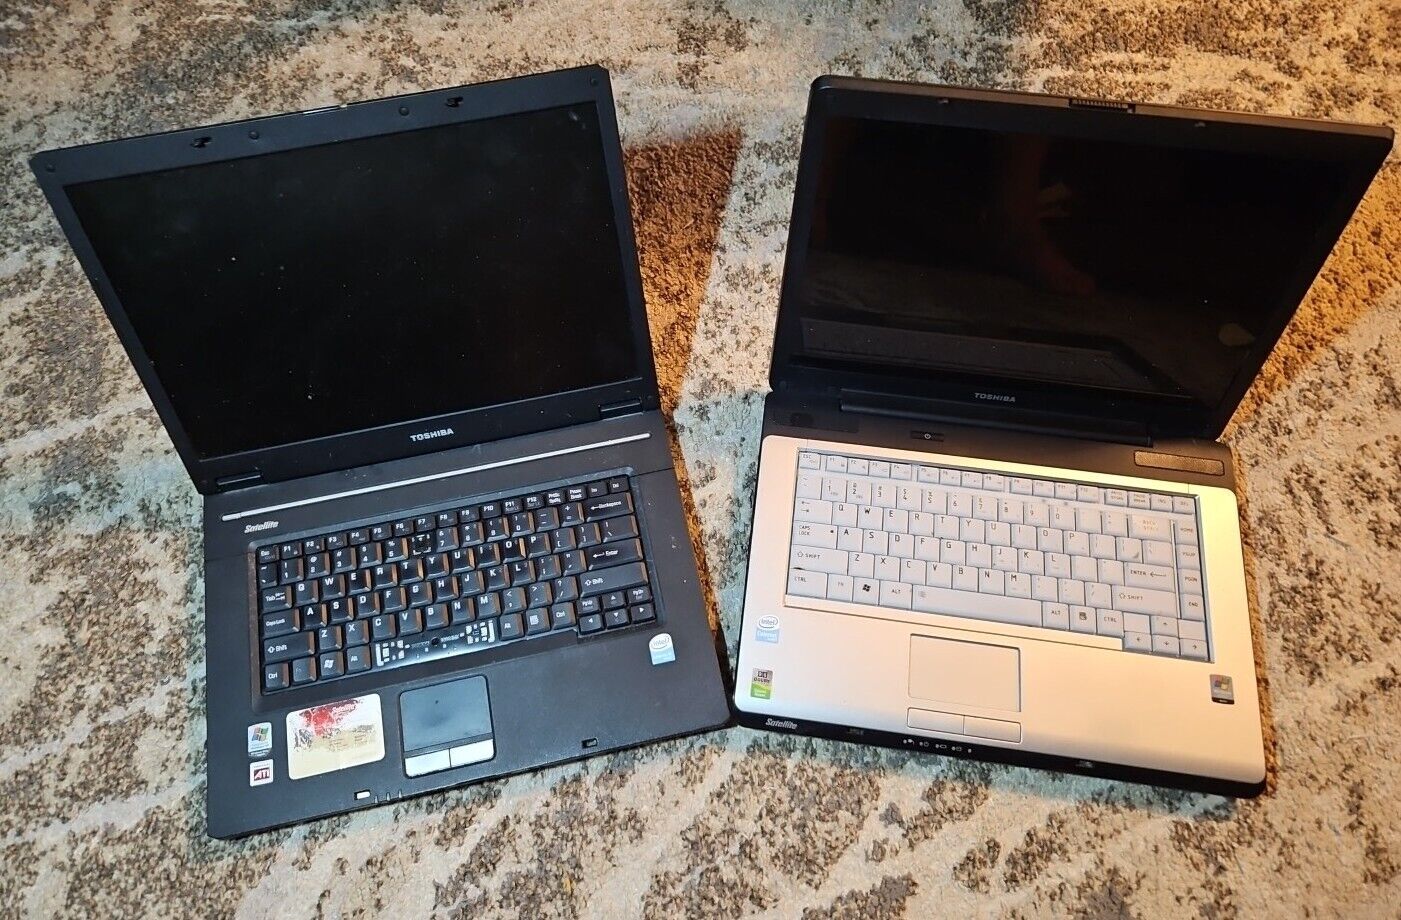 AS IS PARTS LOT OF 2 Toshiba Satelite Laptops. Broken. Parts Only 